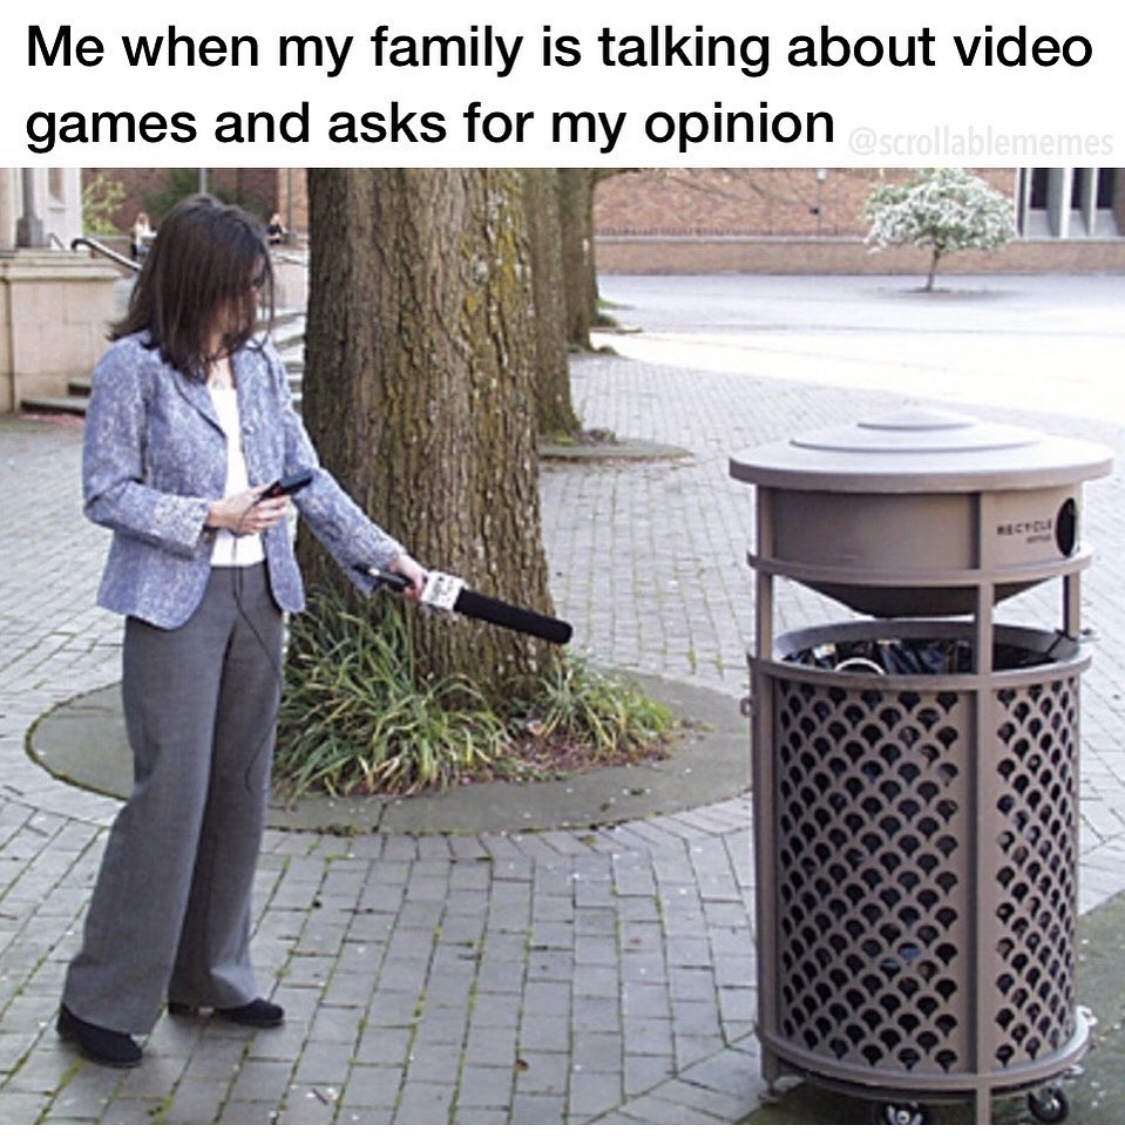 garbage can interview - Me when my family is talking about video games and asks for my opinion